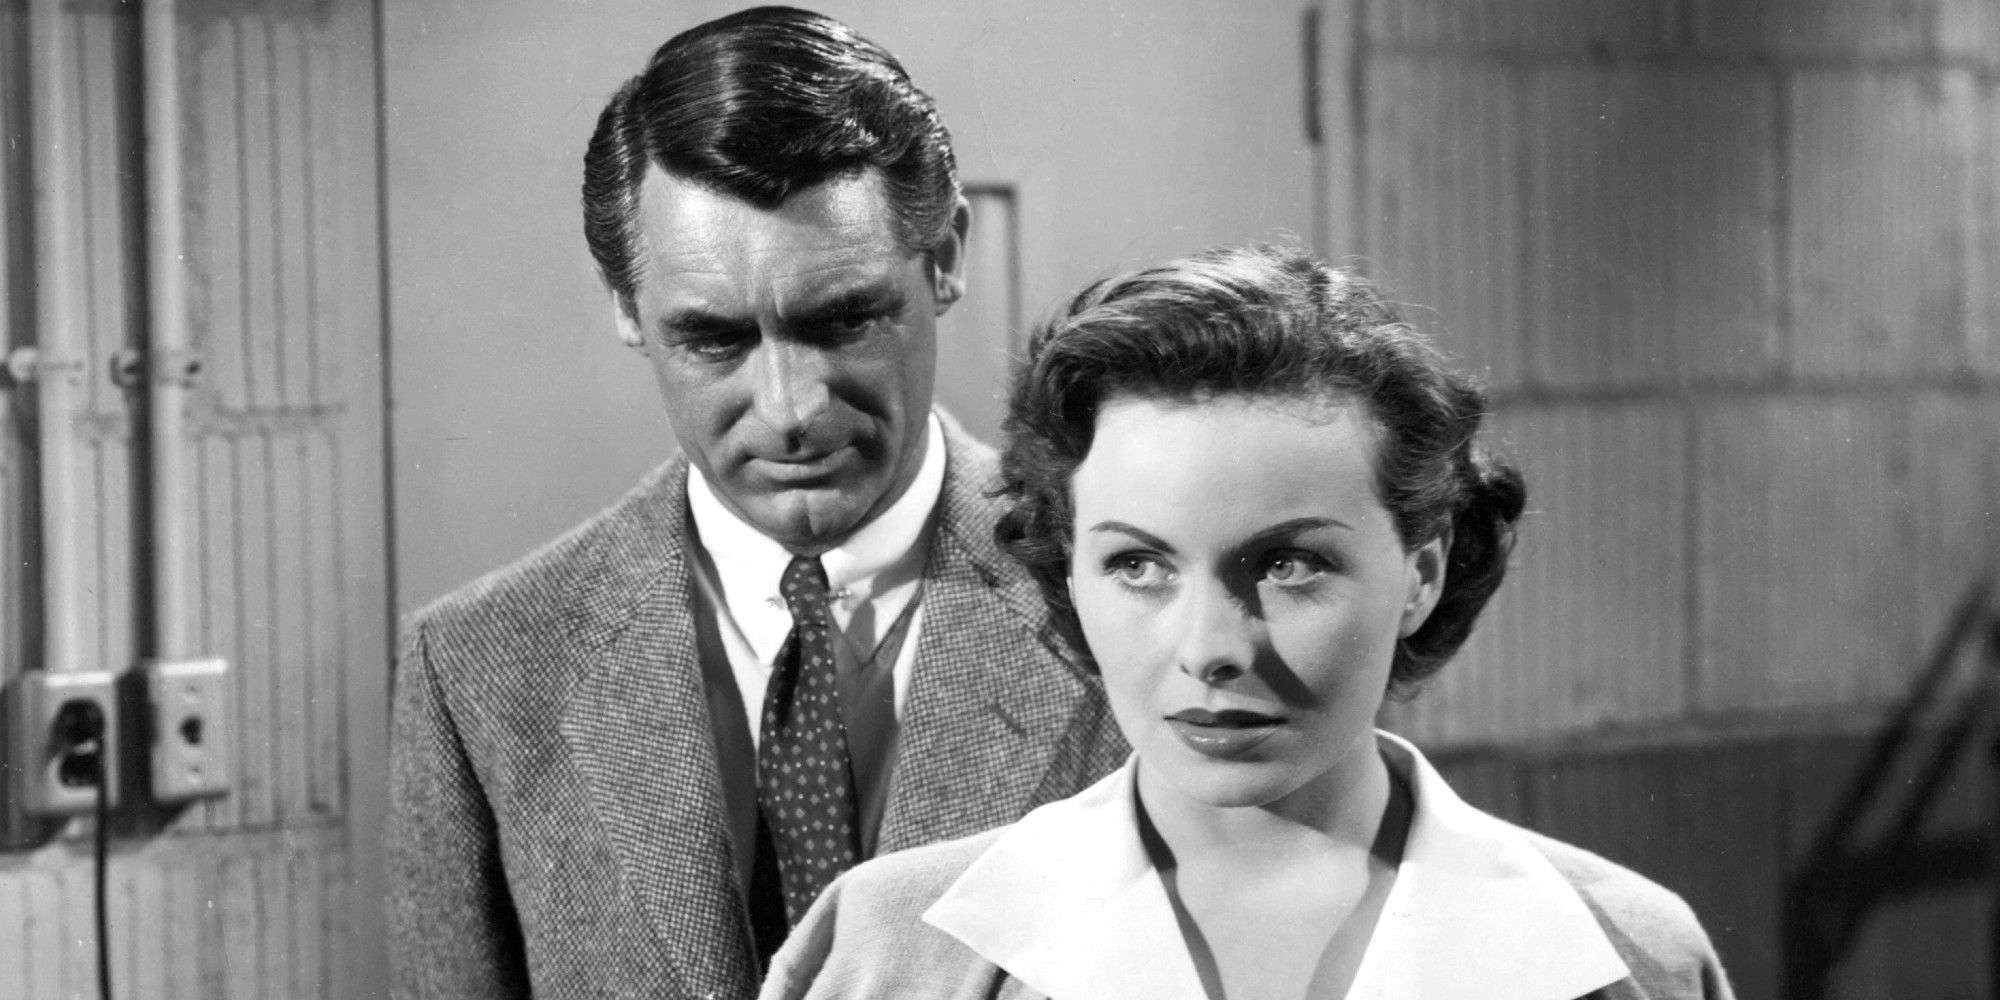 Cary Grant and Jeanne Crain in 'People Will Talk'